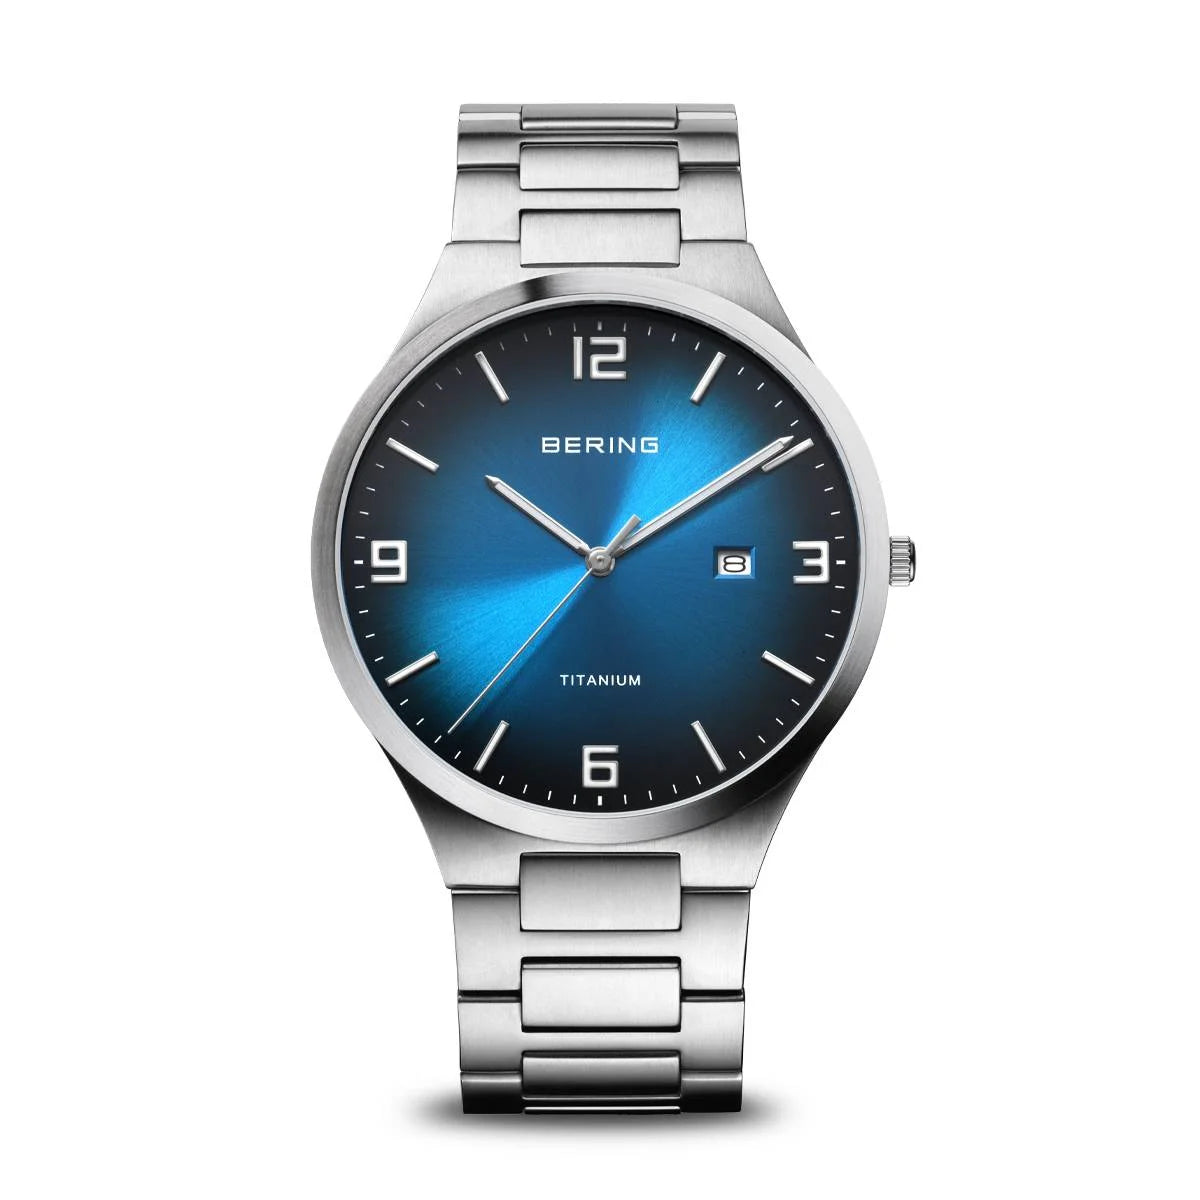 Bering Men's Titanium Watch with Blue Dial 15240-777 Watches Bering 